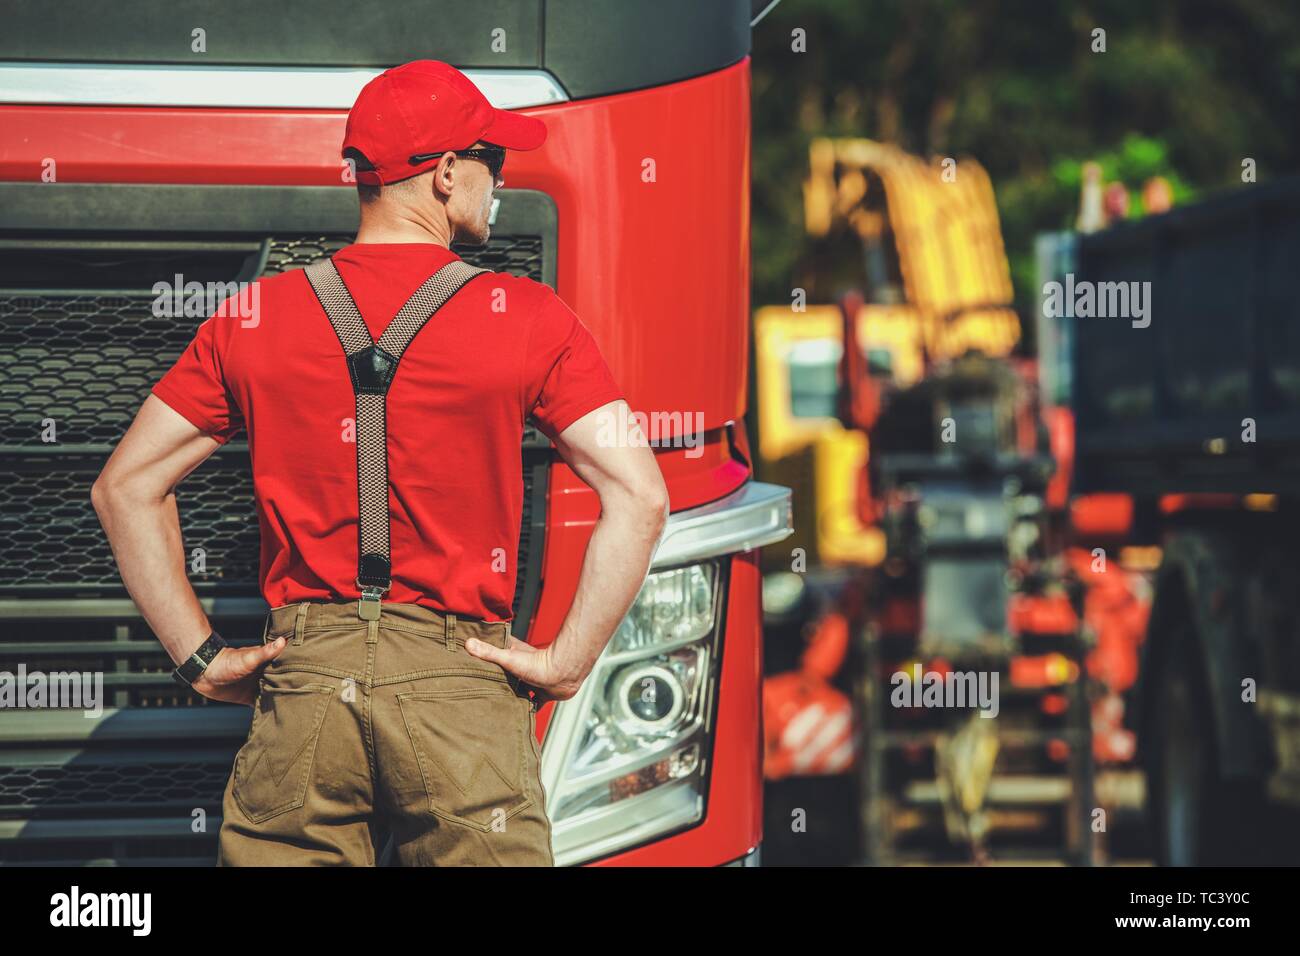 Semi Truck Driver in His 30s. Euro Transportation Concept. Transport Industry. Stock Photo